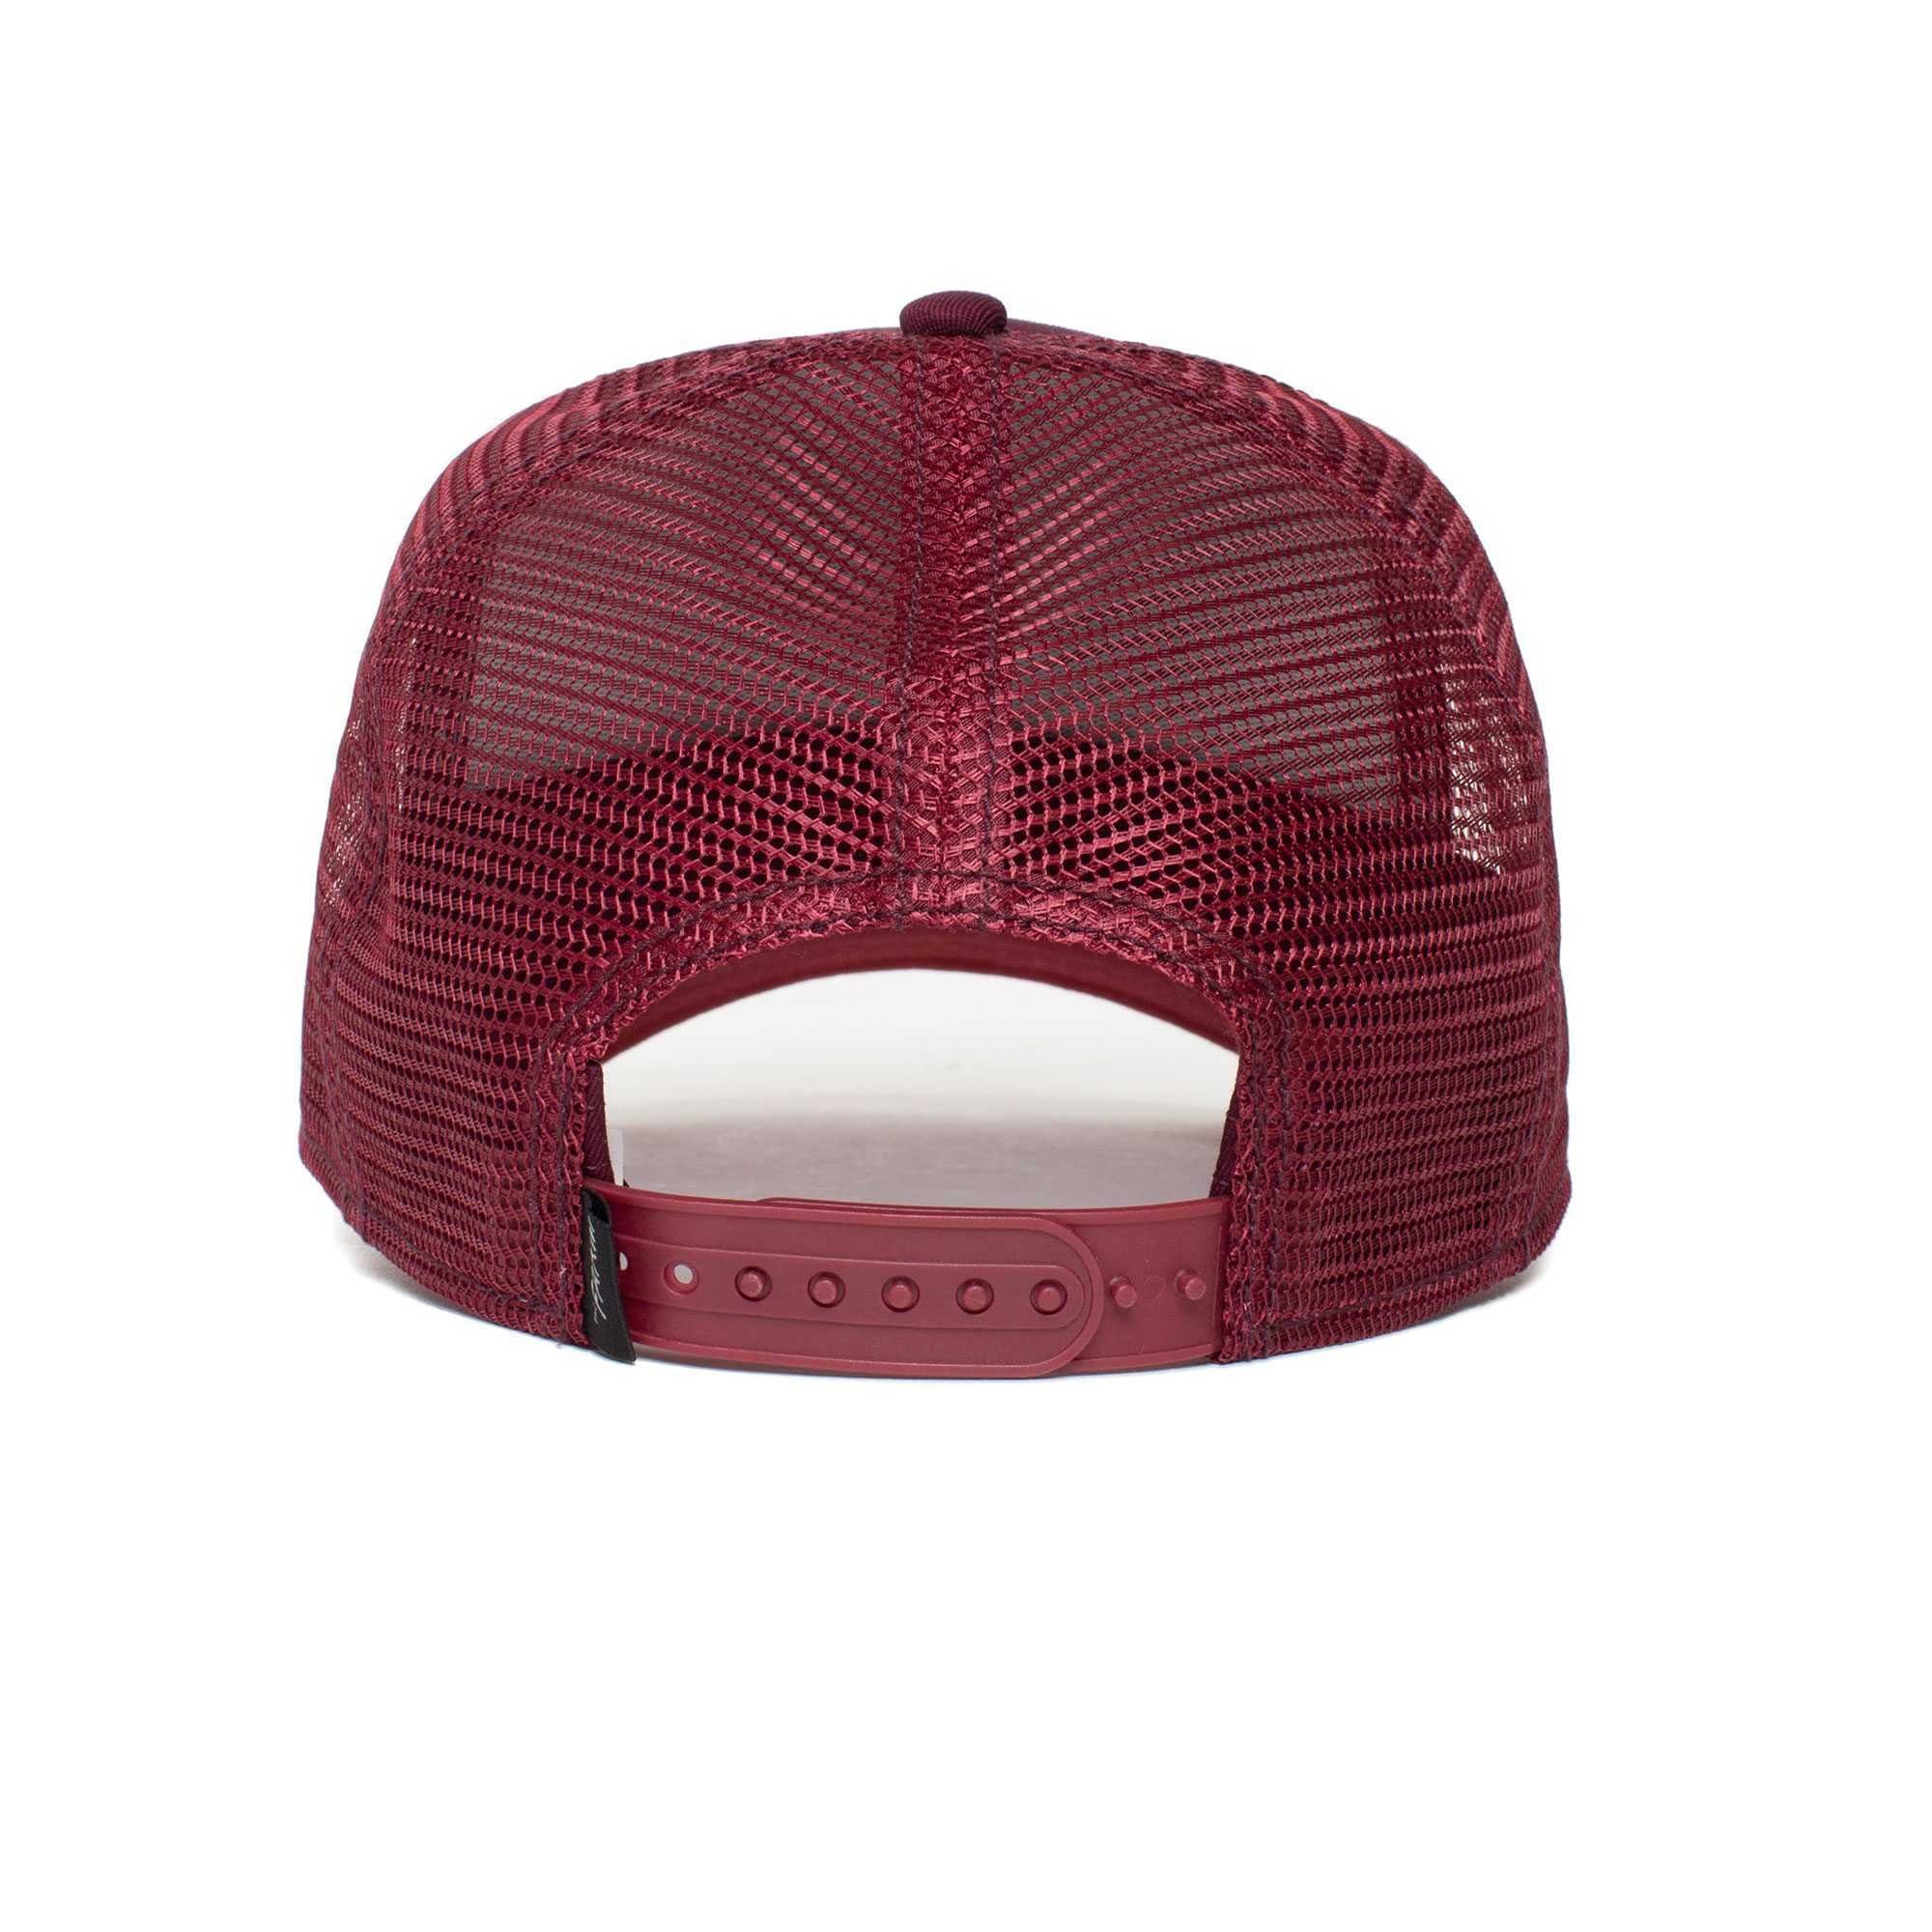 Cap Kappe, Unisex The Panther Frontpatch, Baseball Bros. GOORIN - maroon One Size Cap Trucker